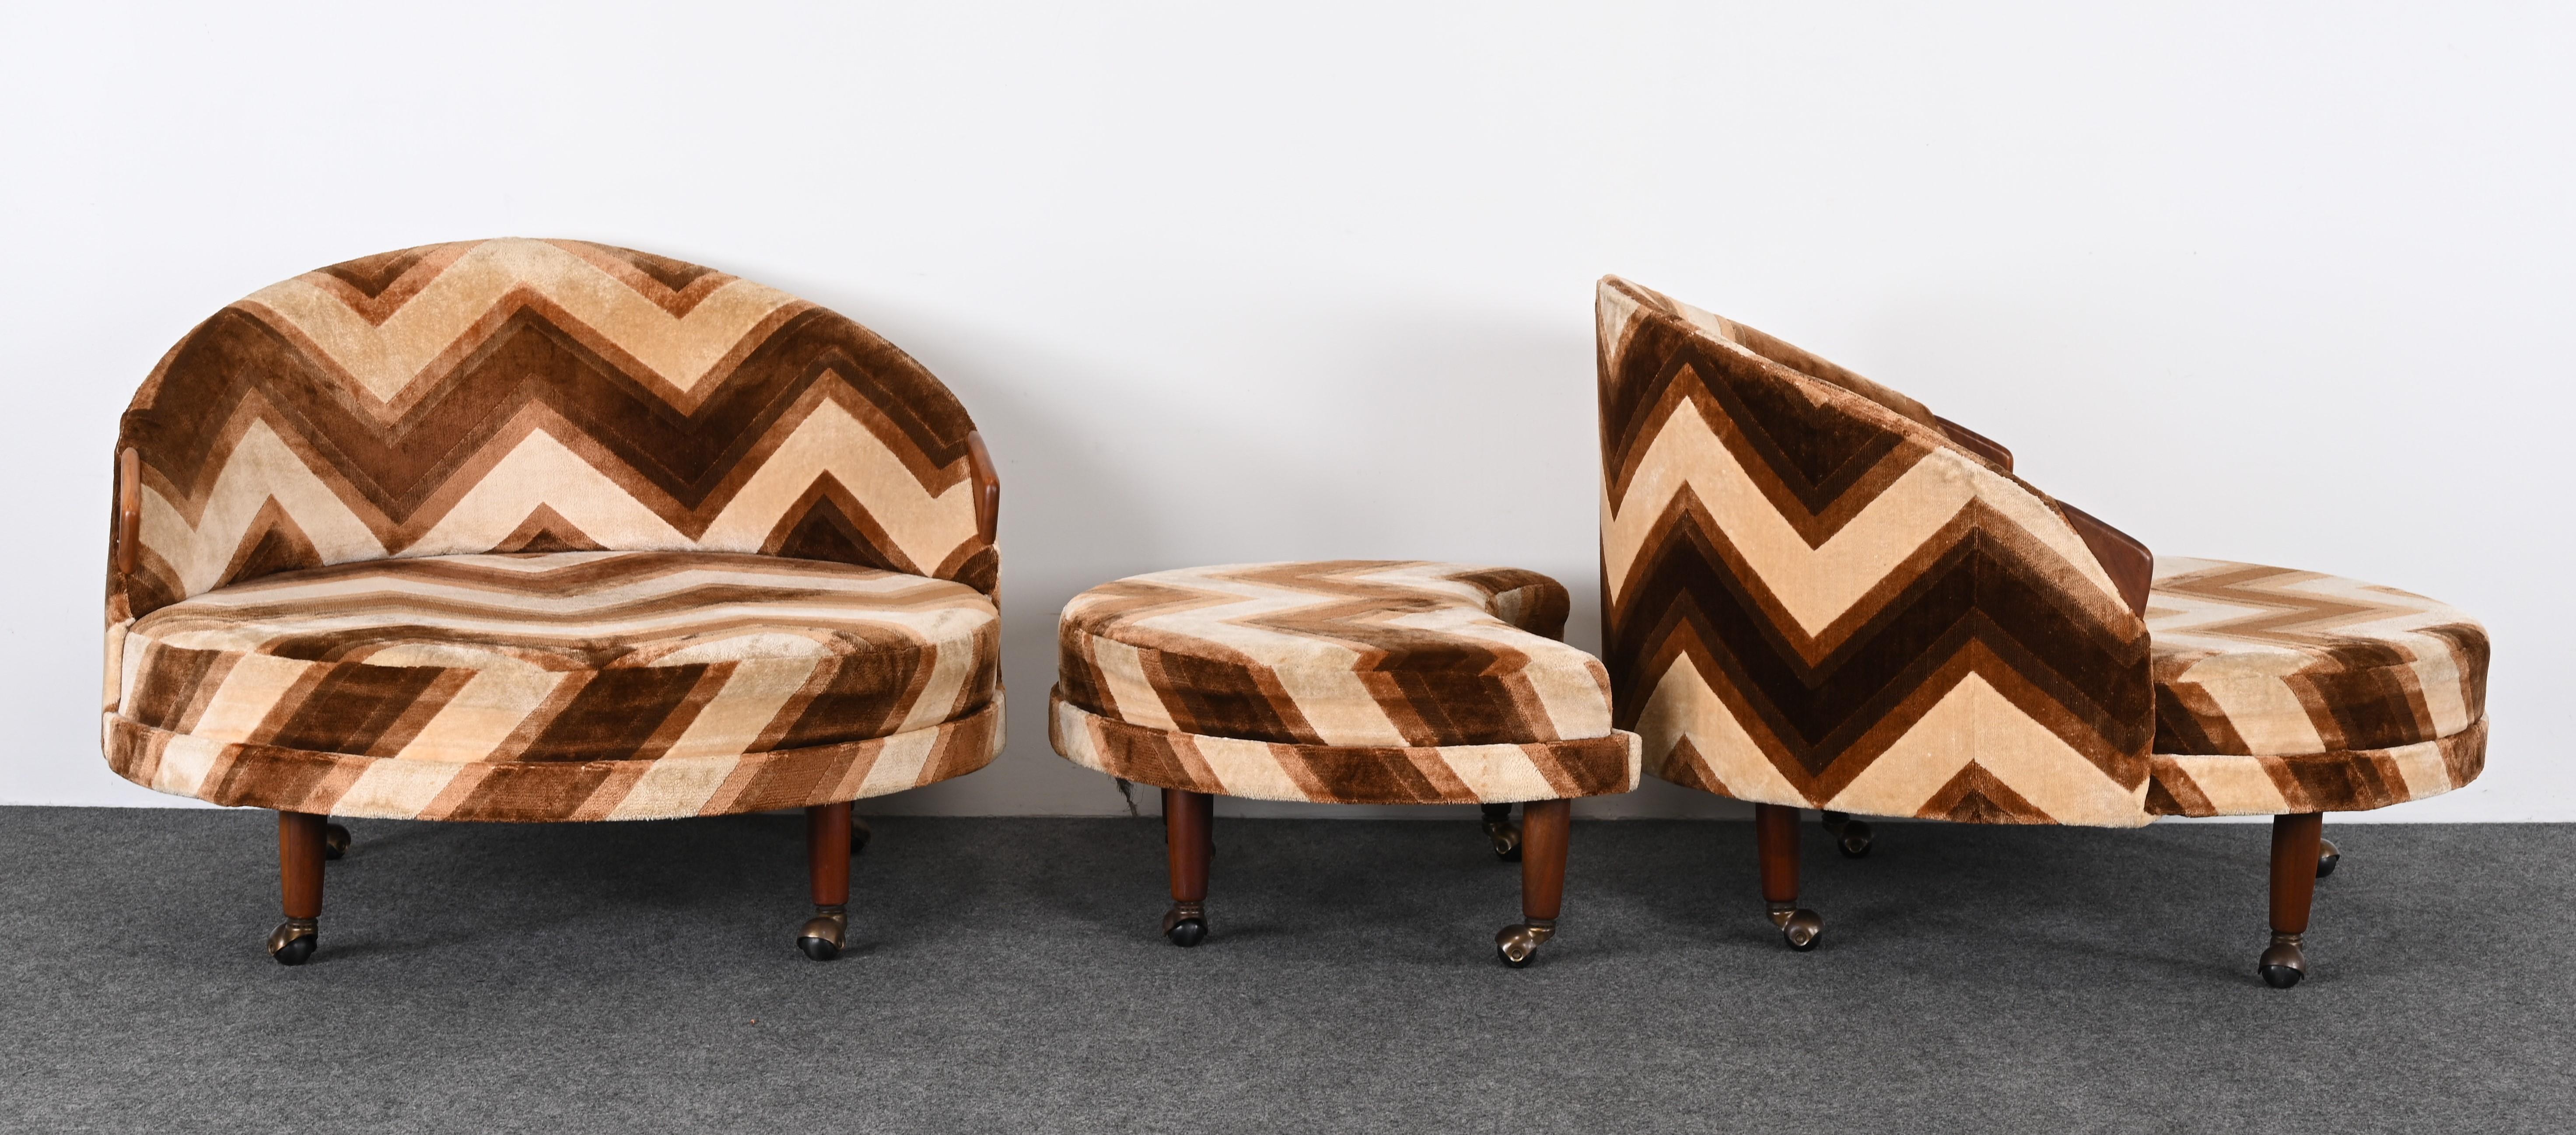 Pair of Adrian Pearsall Havana Lounge Chairs and Ottoman, 1965 For Sale 10